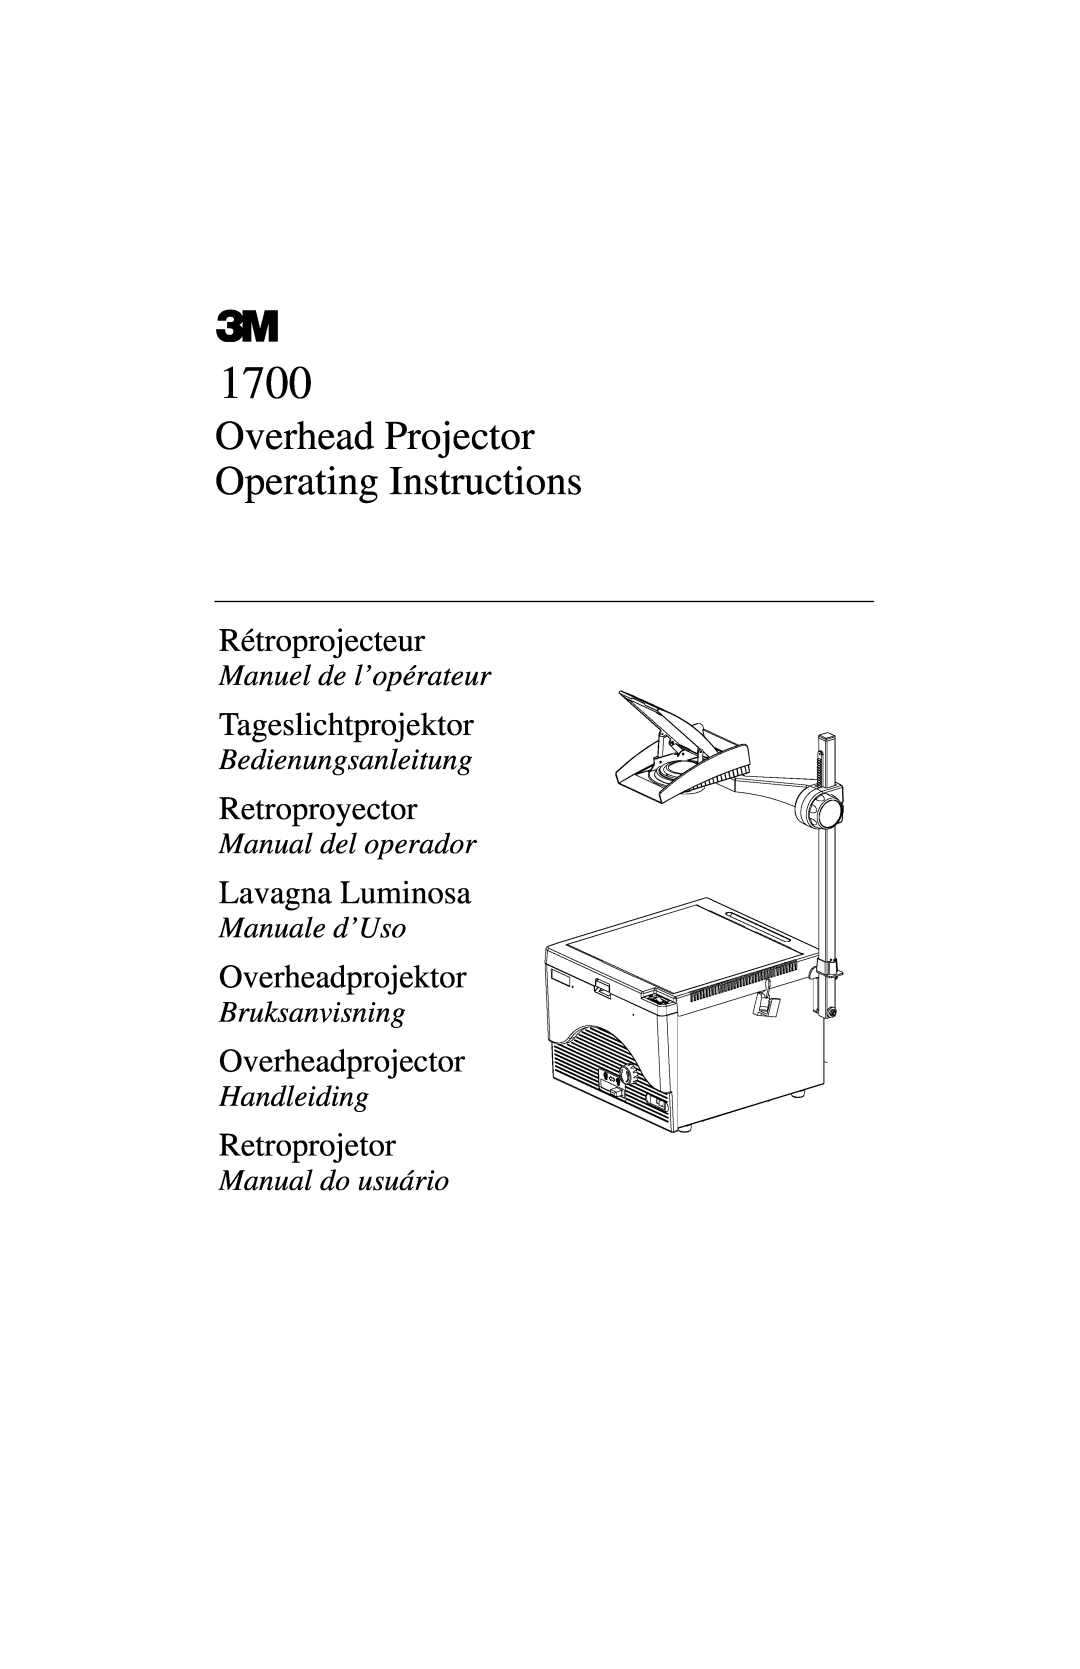 3M 1700 operating instructions Overhead Projector Operating Instructions, Rétroprojecteur, Tageslichtprojektor 